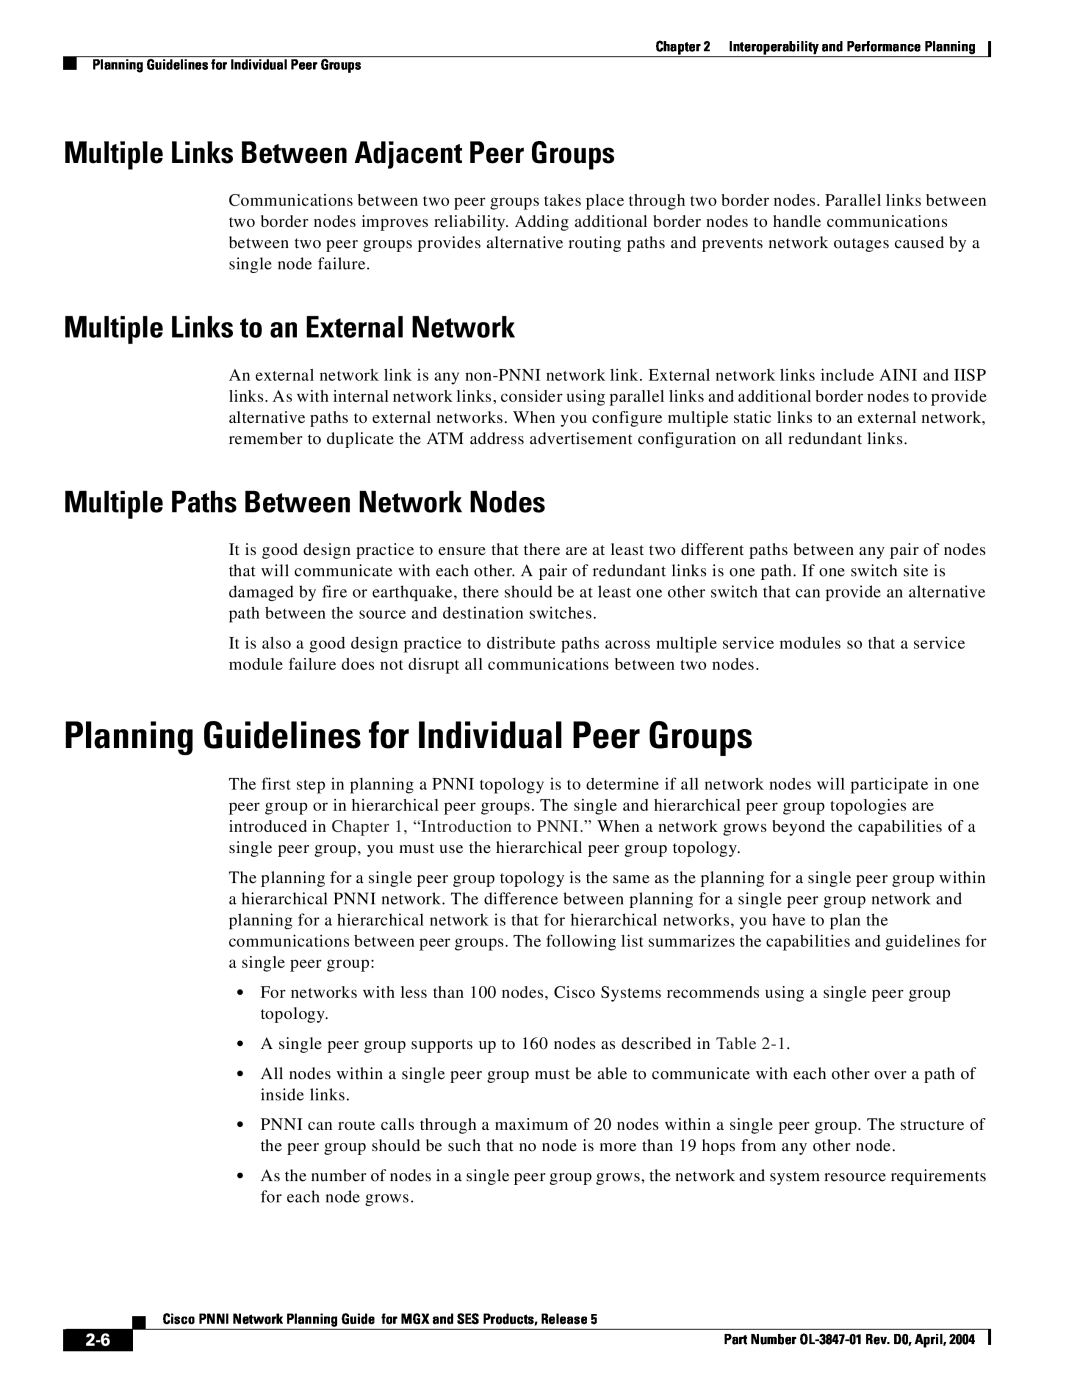 Cisco Systems Network Router Planning Guidelines for Individual Peer Groups, Multiple Links Between Adjacent Peer Groups 